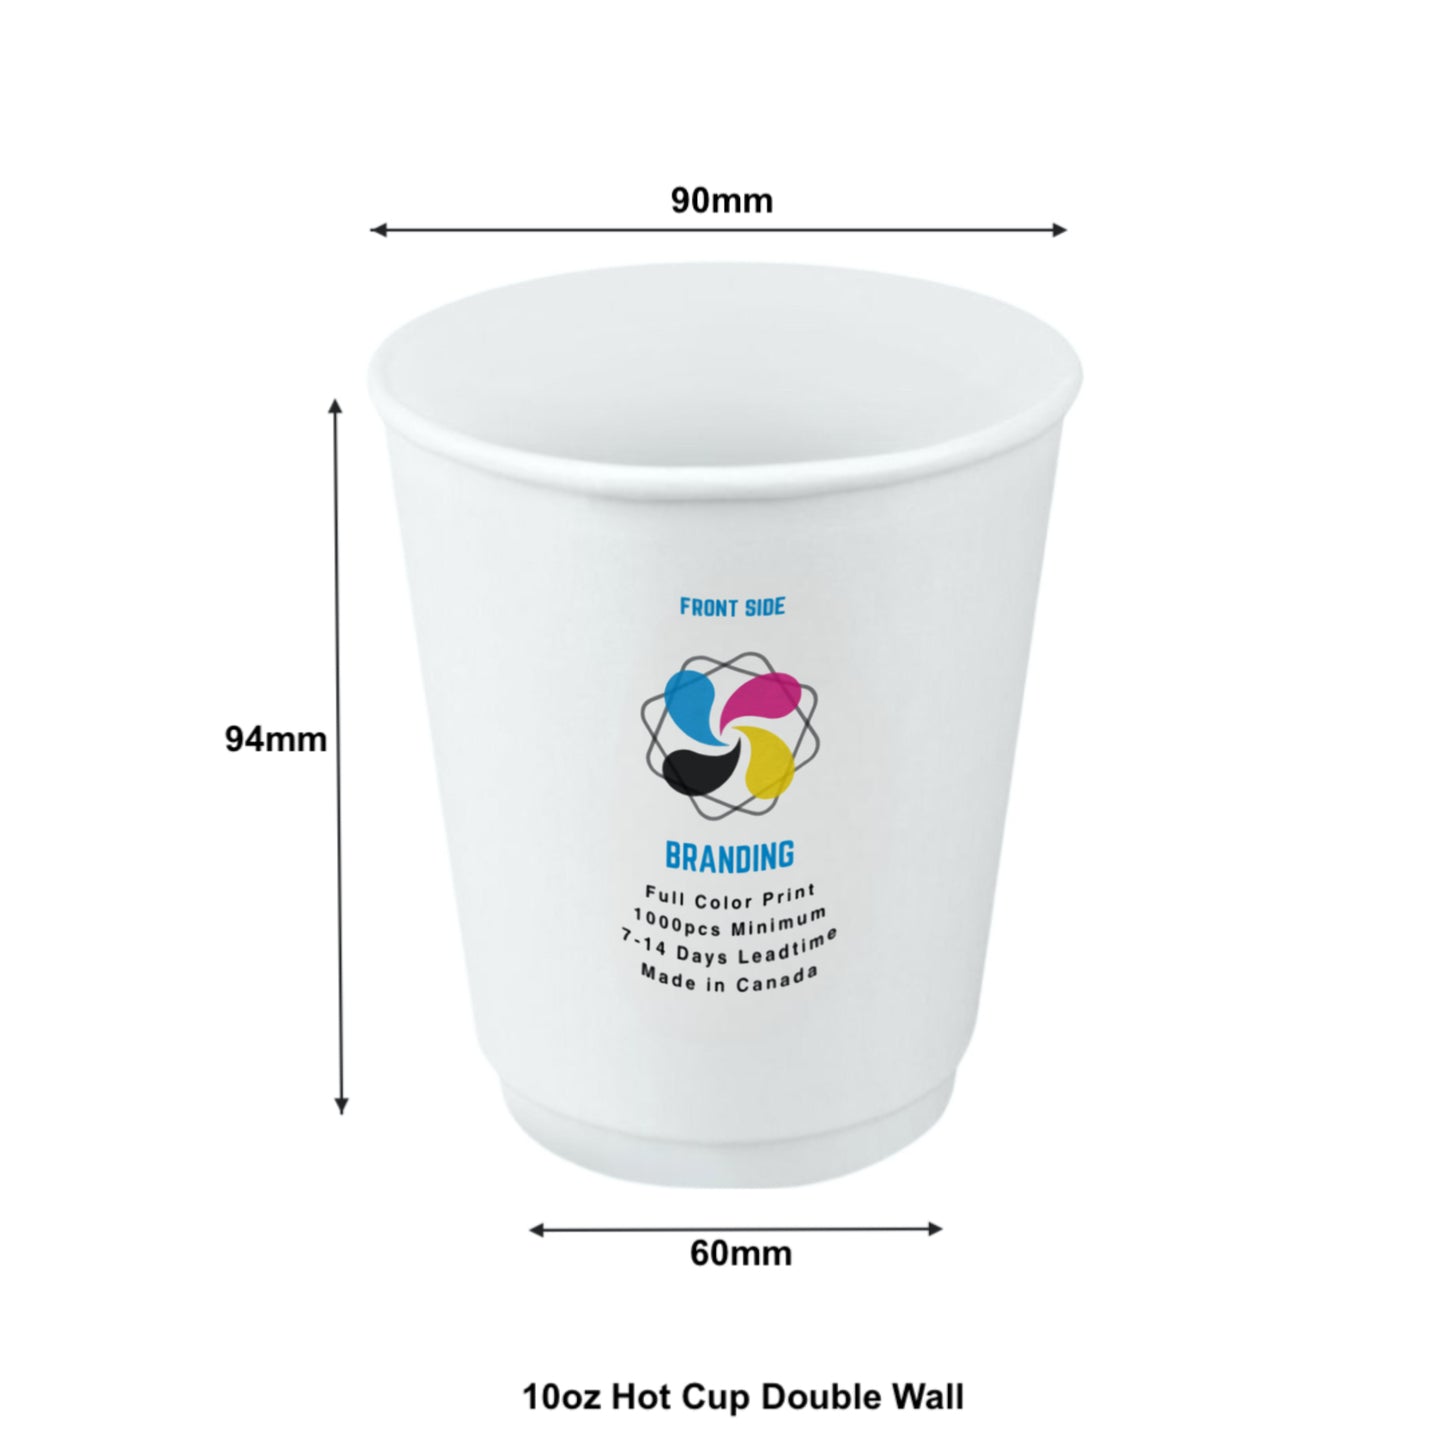 500pcs 10oz, 296ml Double Wall White Paper Hot Cups with 90mm Opening; Full Color Custom Print, Printed in Canada